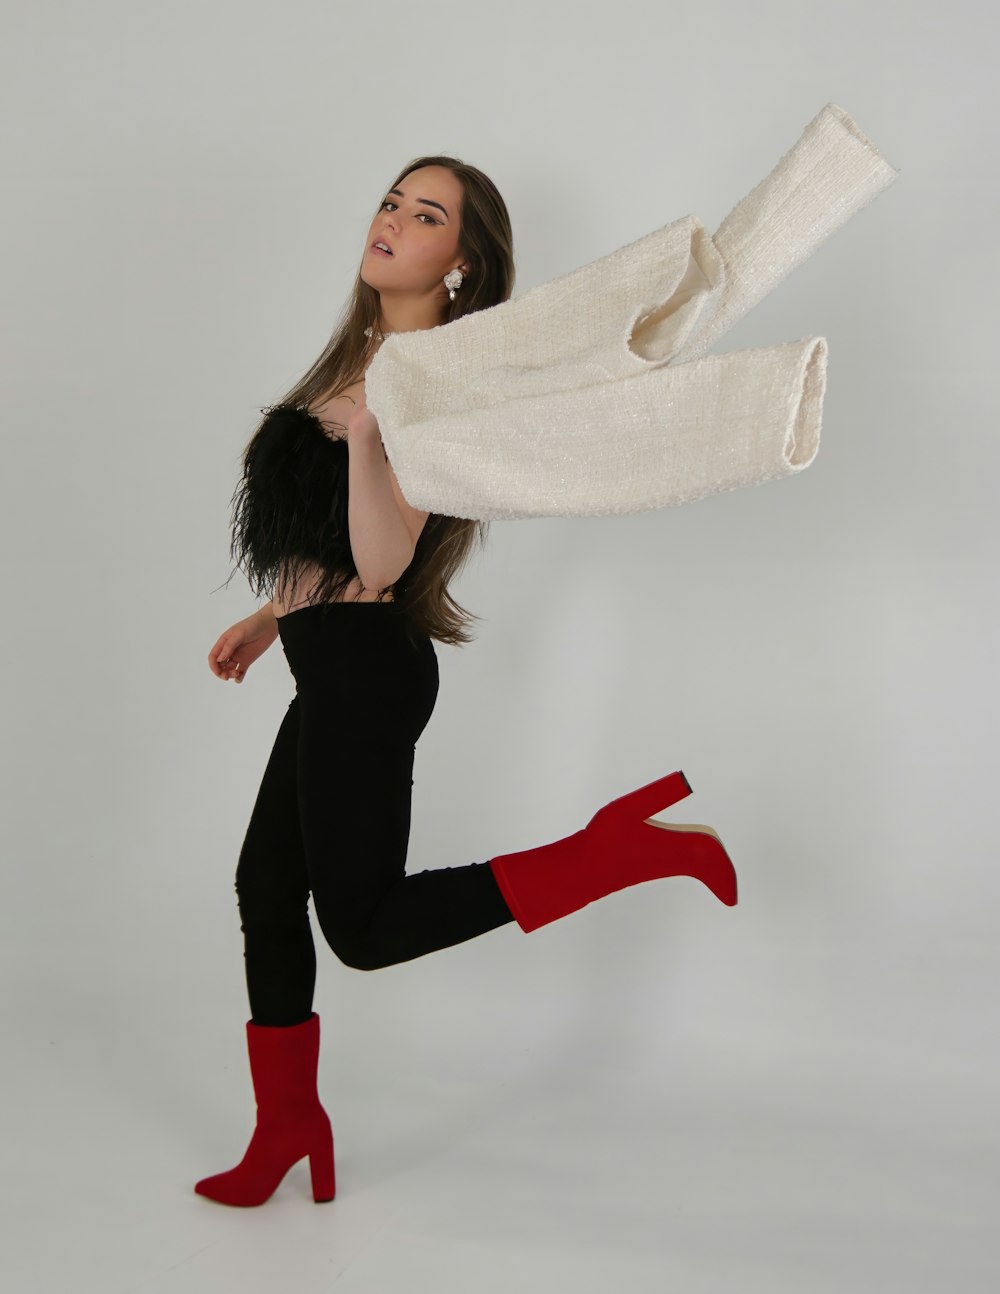 a woman in black pants and red boots is holding a white scarf